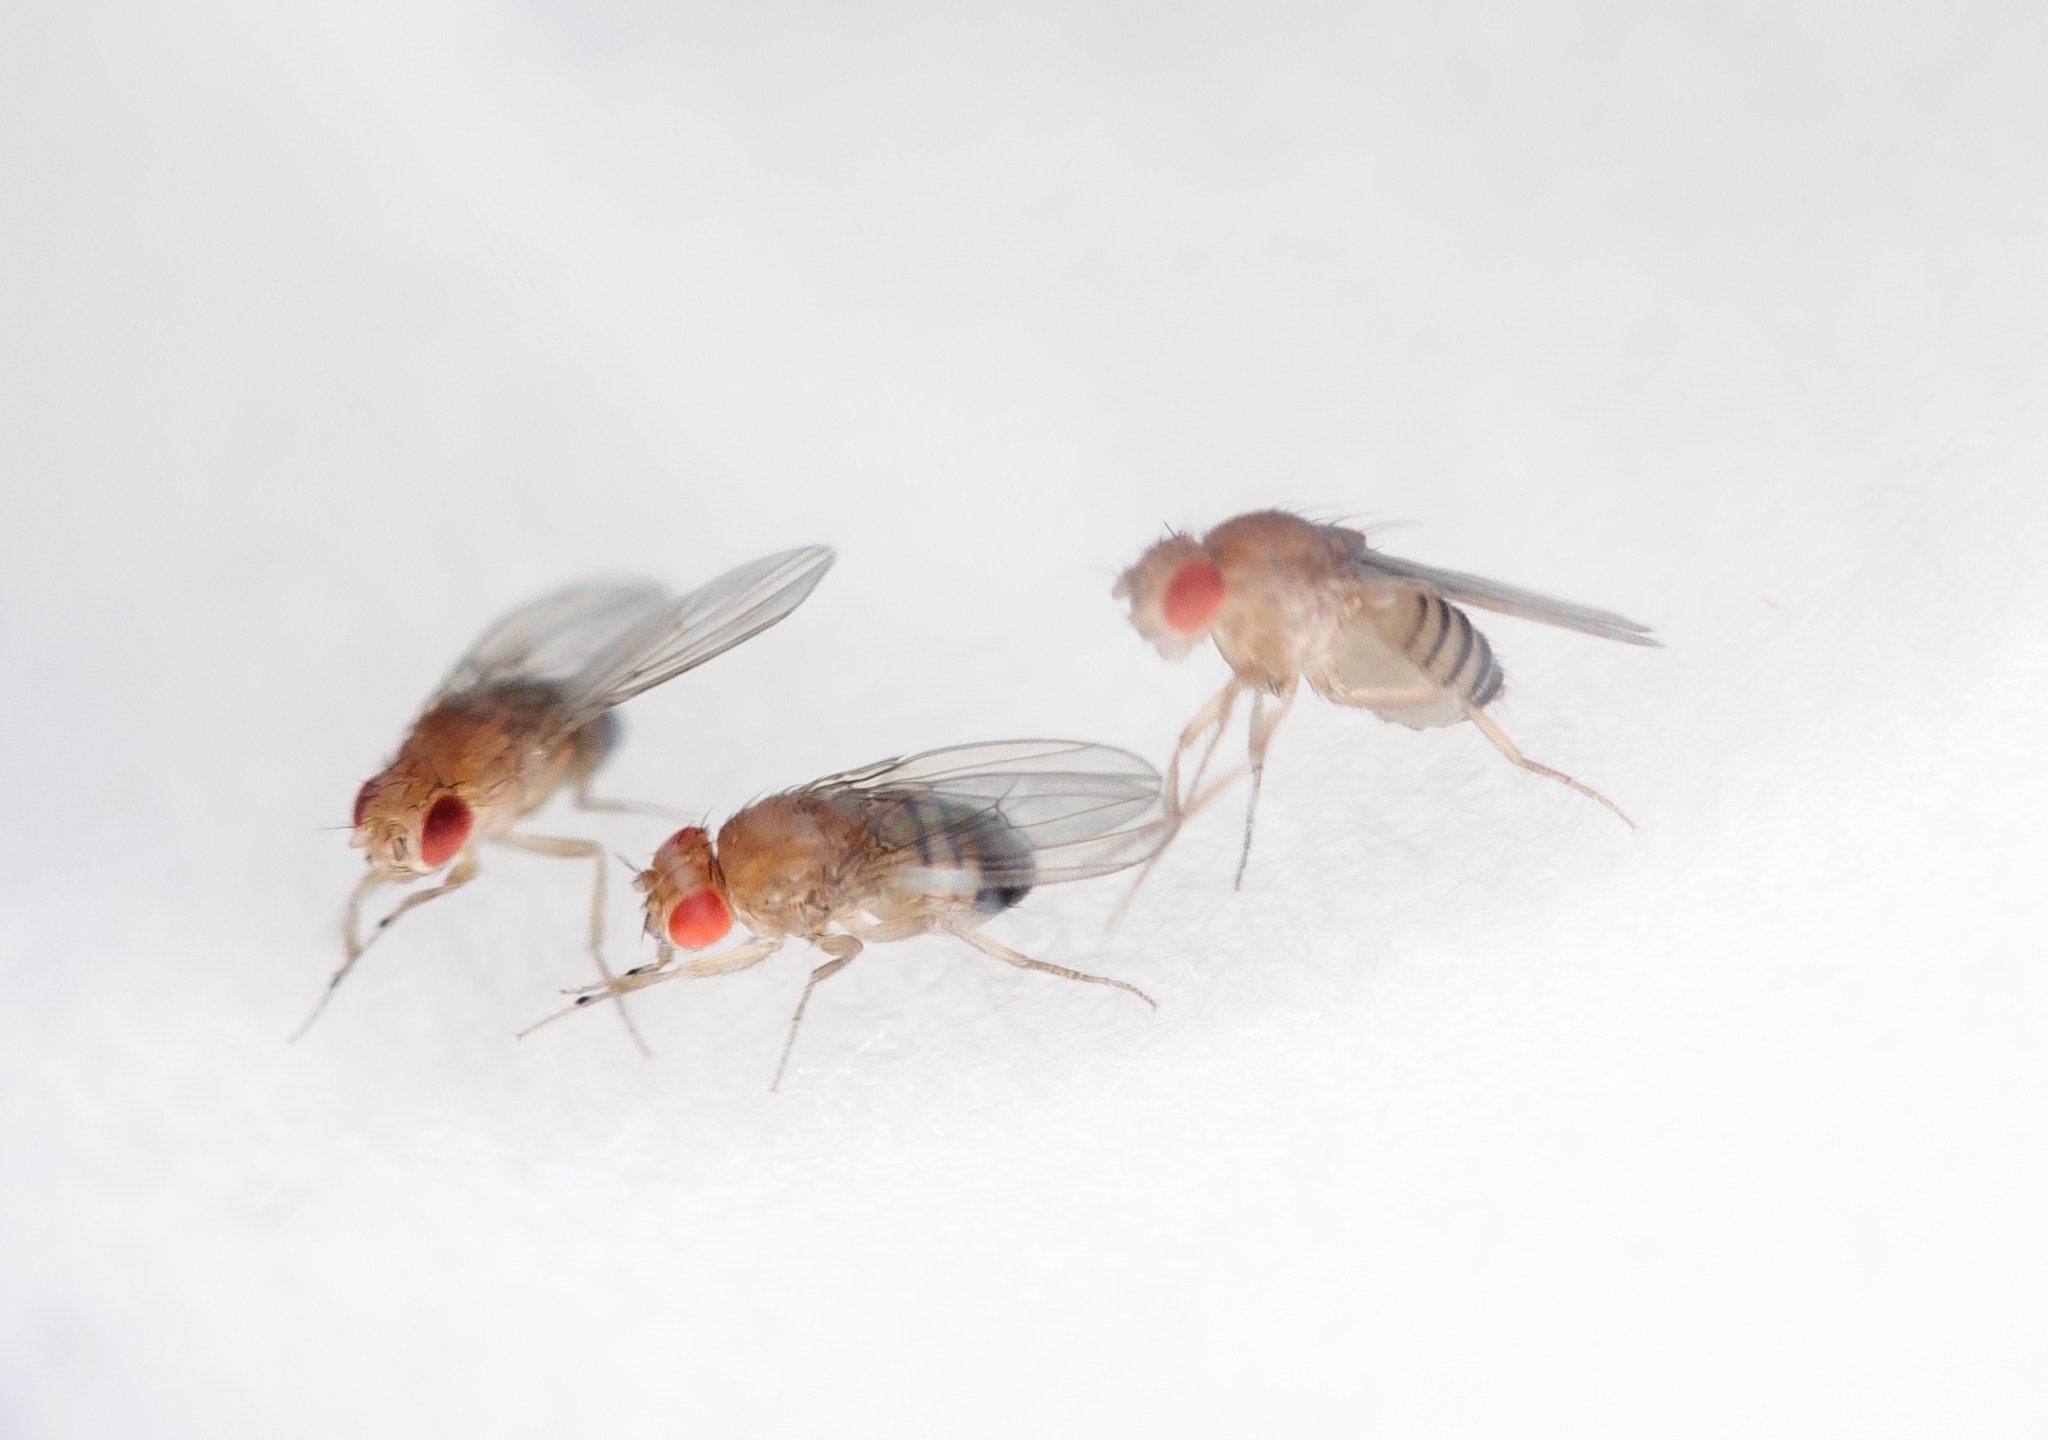 Fruit flies (Drosophila melanogaster) are used for scientific research both on Earth and in space.